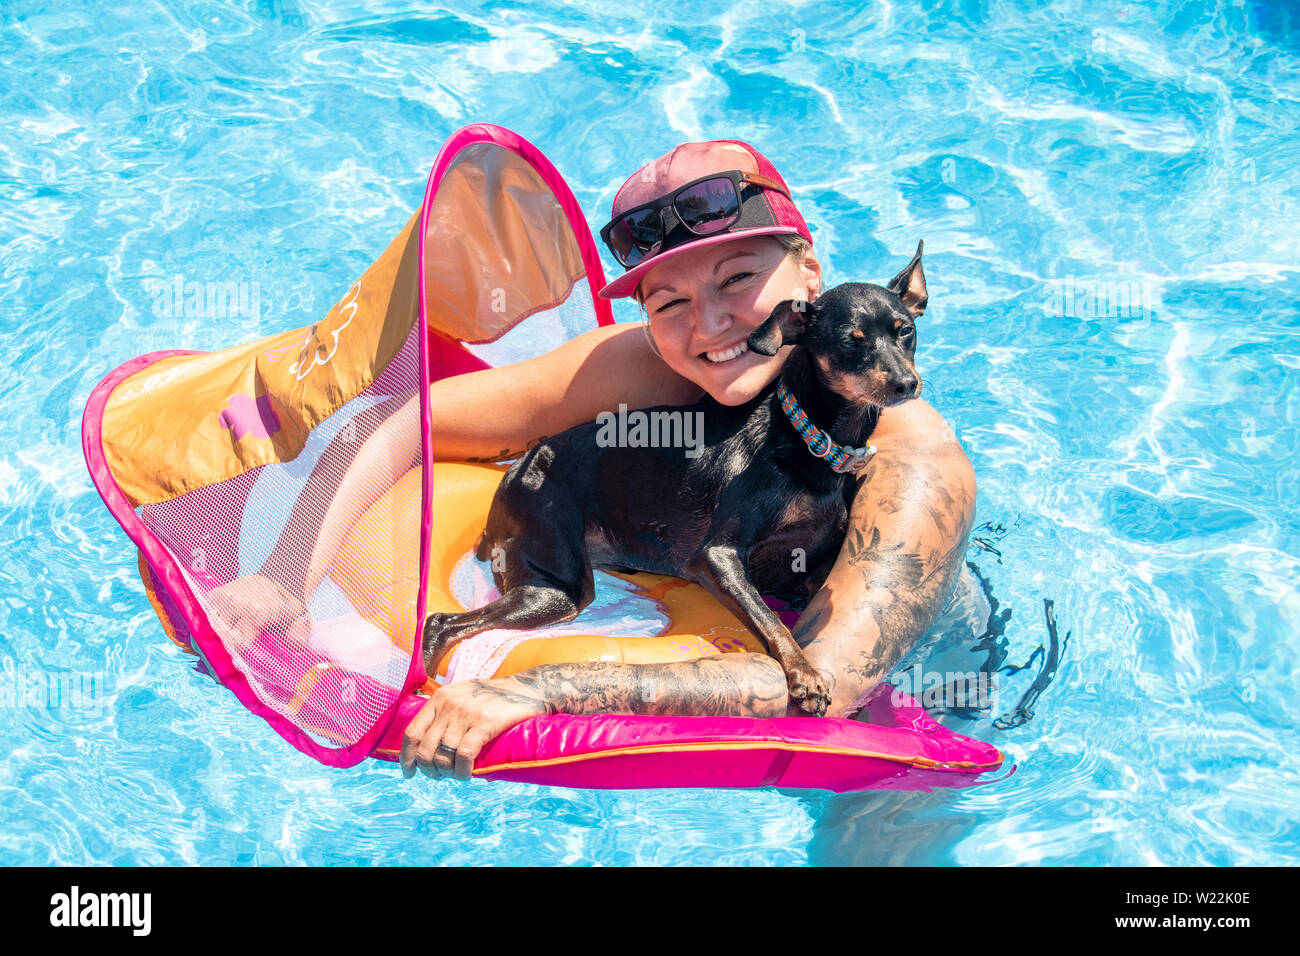 caucasian woman relaxing with black pinscher dog on a flotation device in the swimming pool Stock Photo